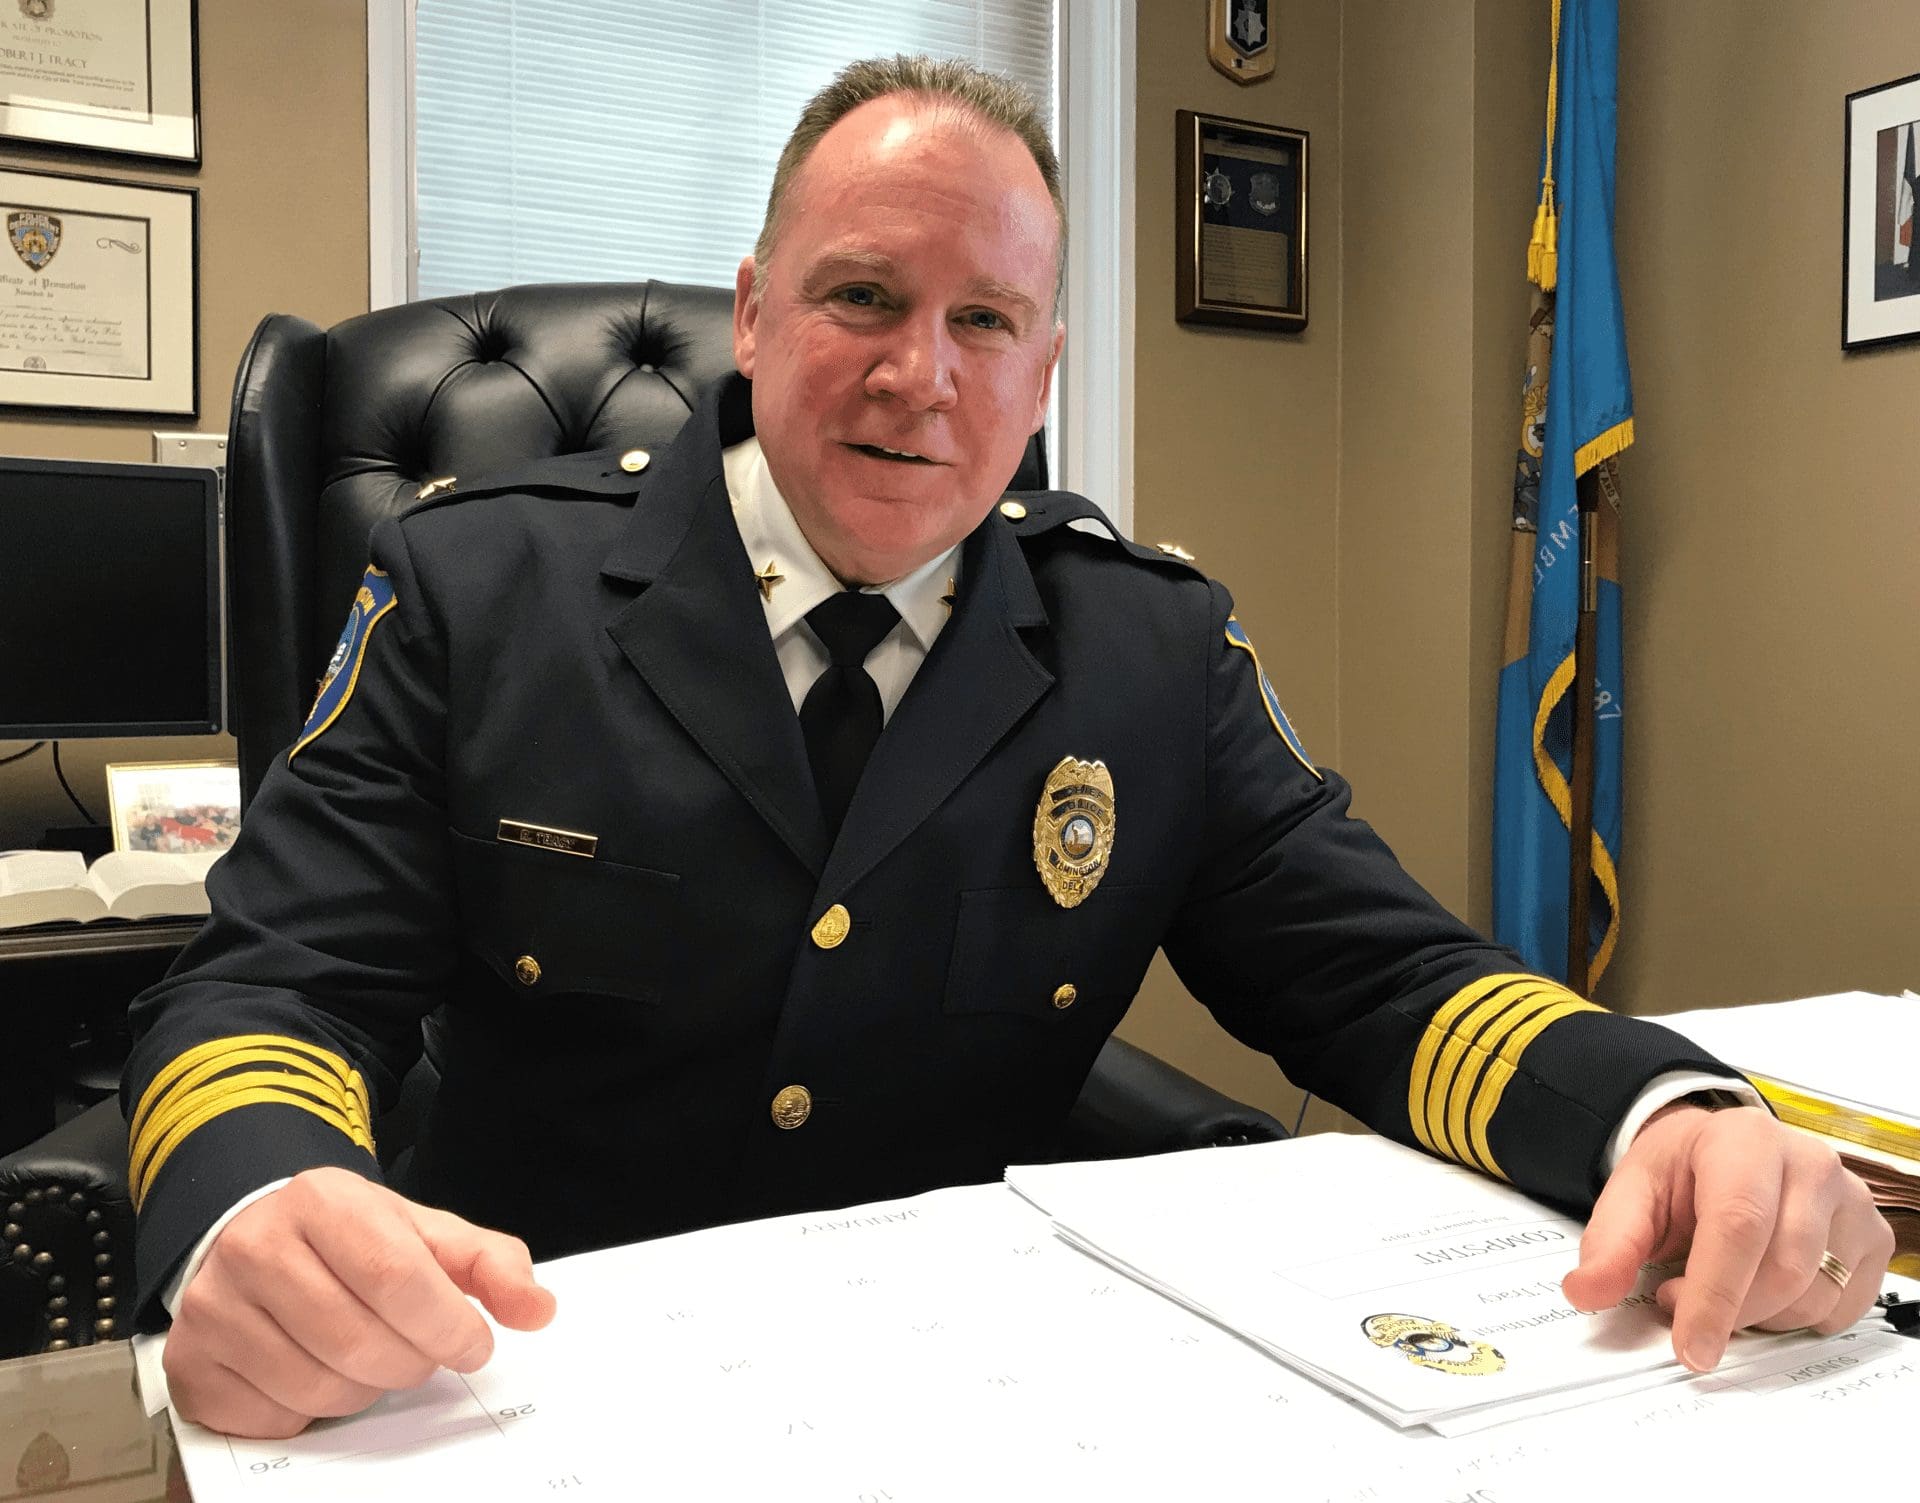 Wilmington residents sign petition in support of police chief